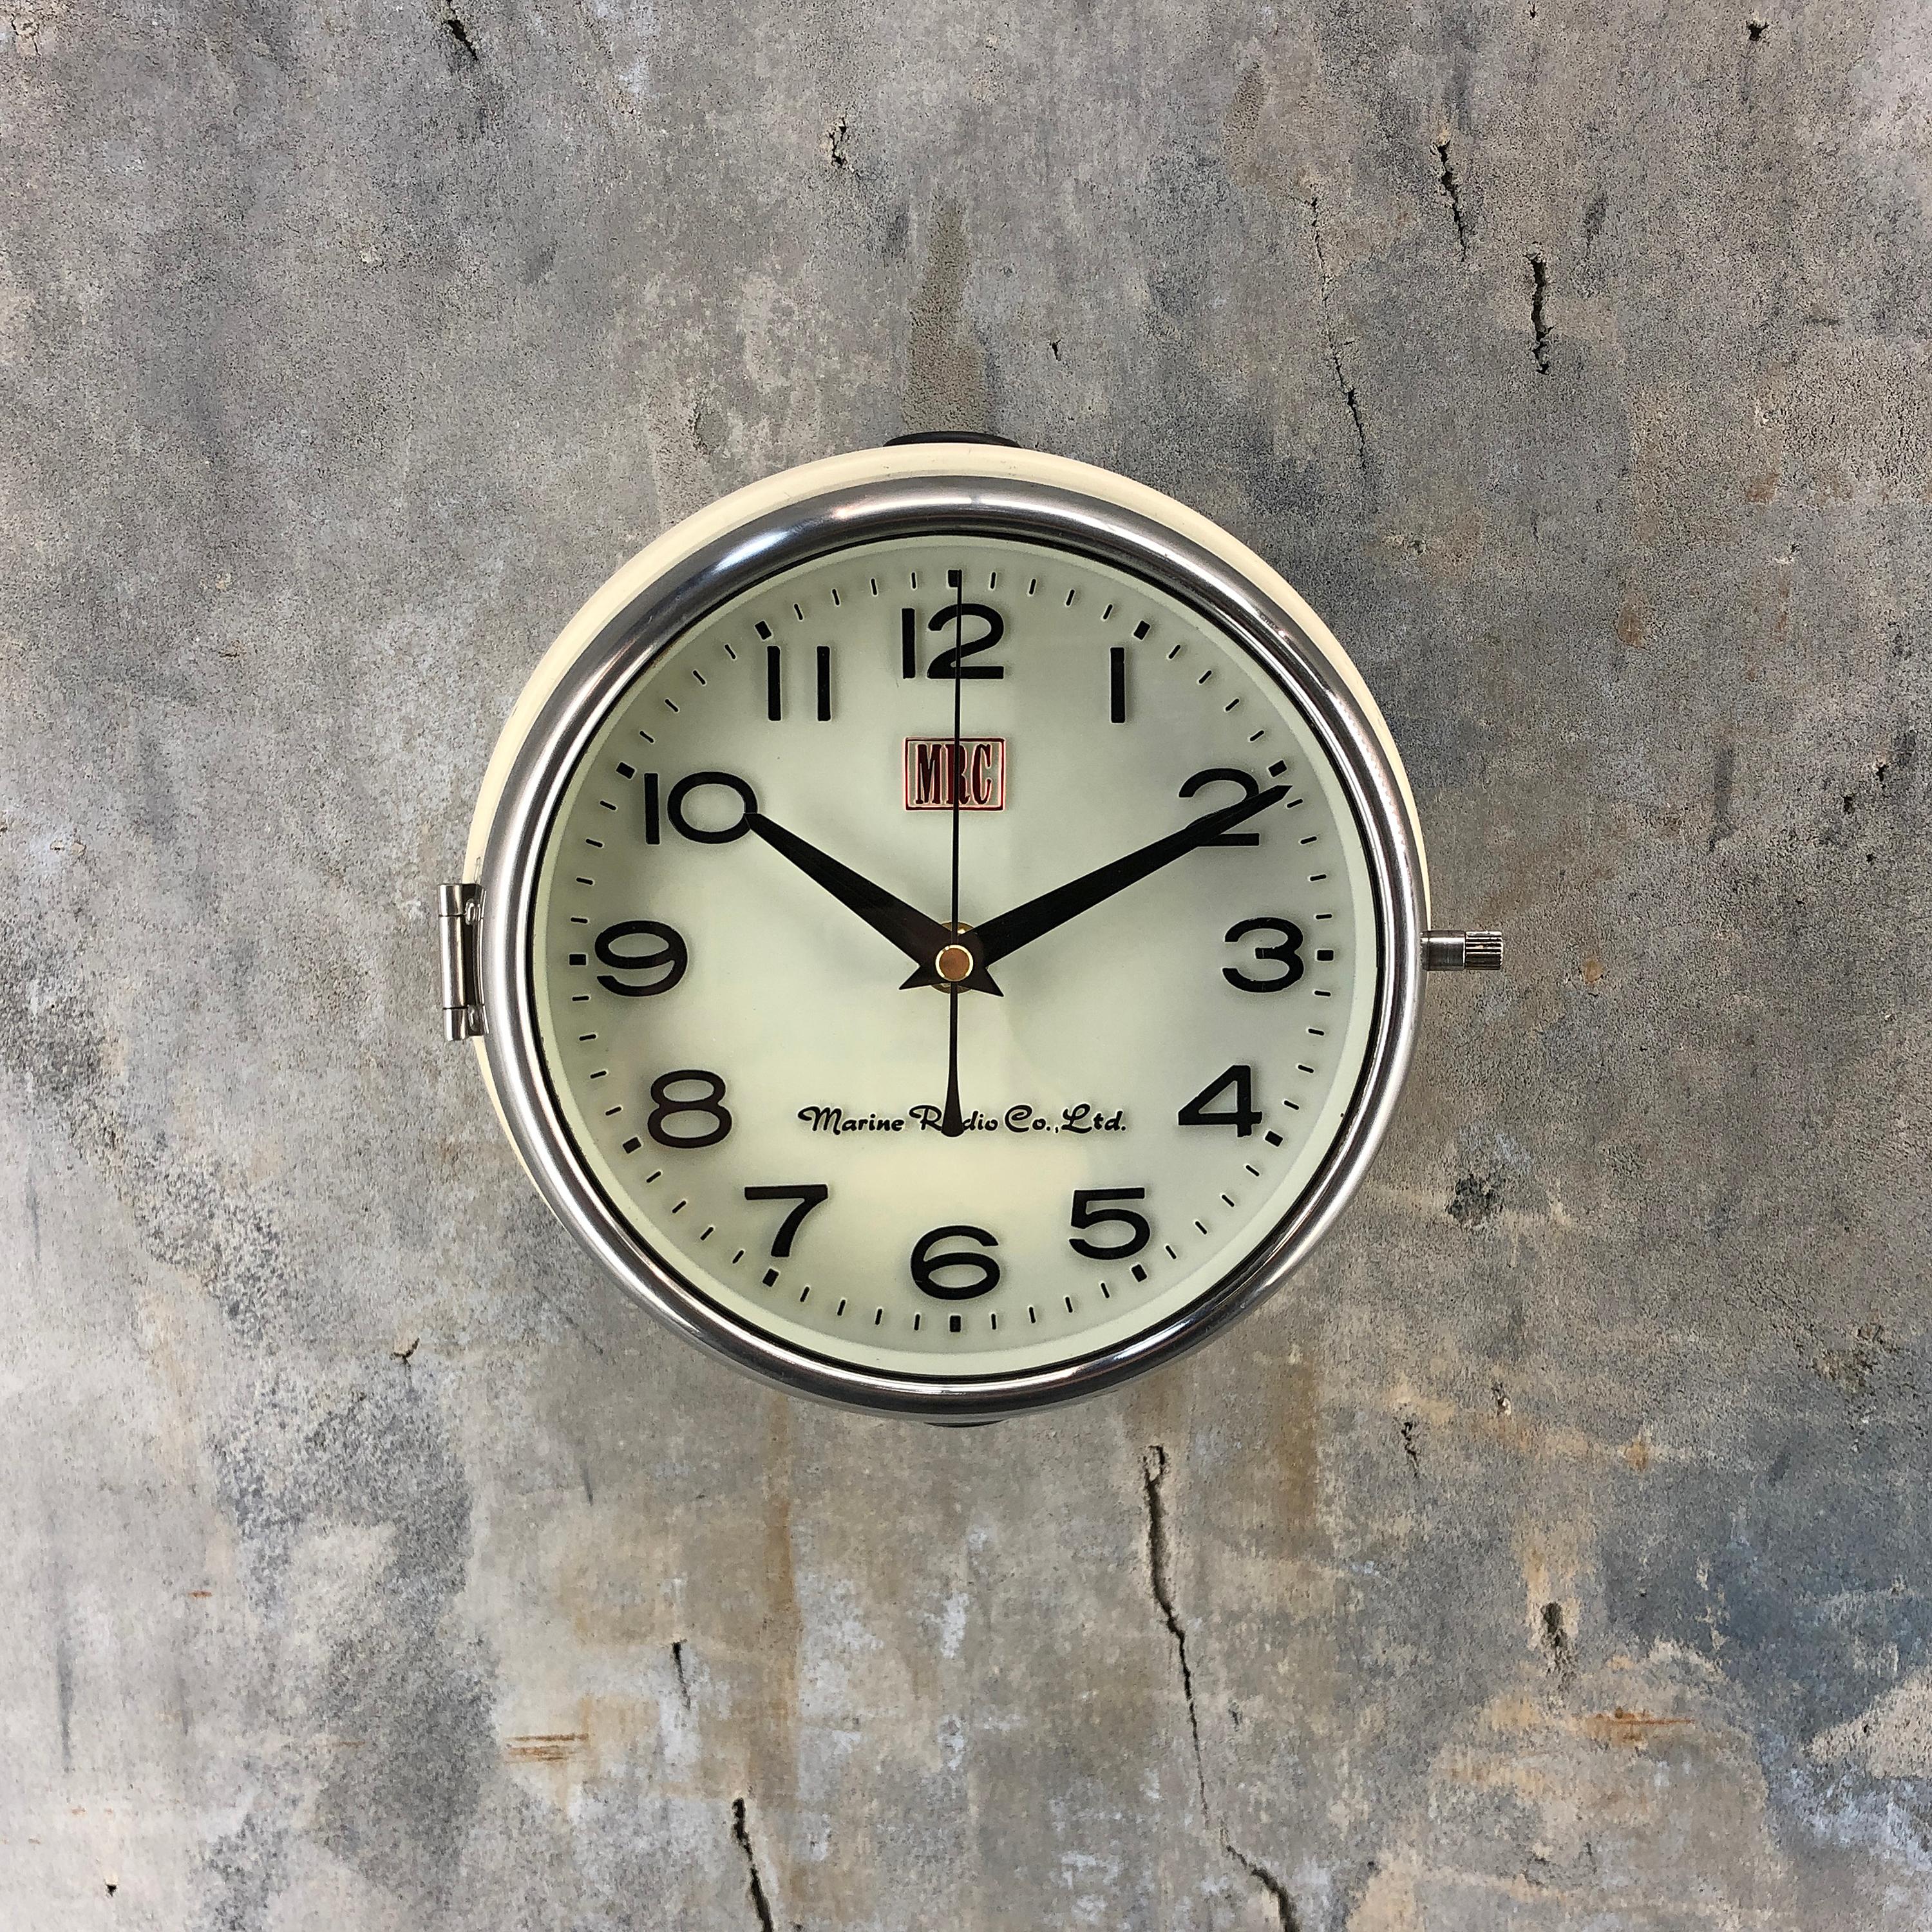 A vintage slave clock made by Marine Radio Clock Co. of Korea.

These clocks were originally used as secondary / slave clocks powered by a master clock on board sea going vessel such as cargo ships and supertankers.

The original movement has